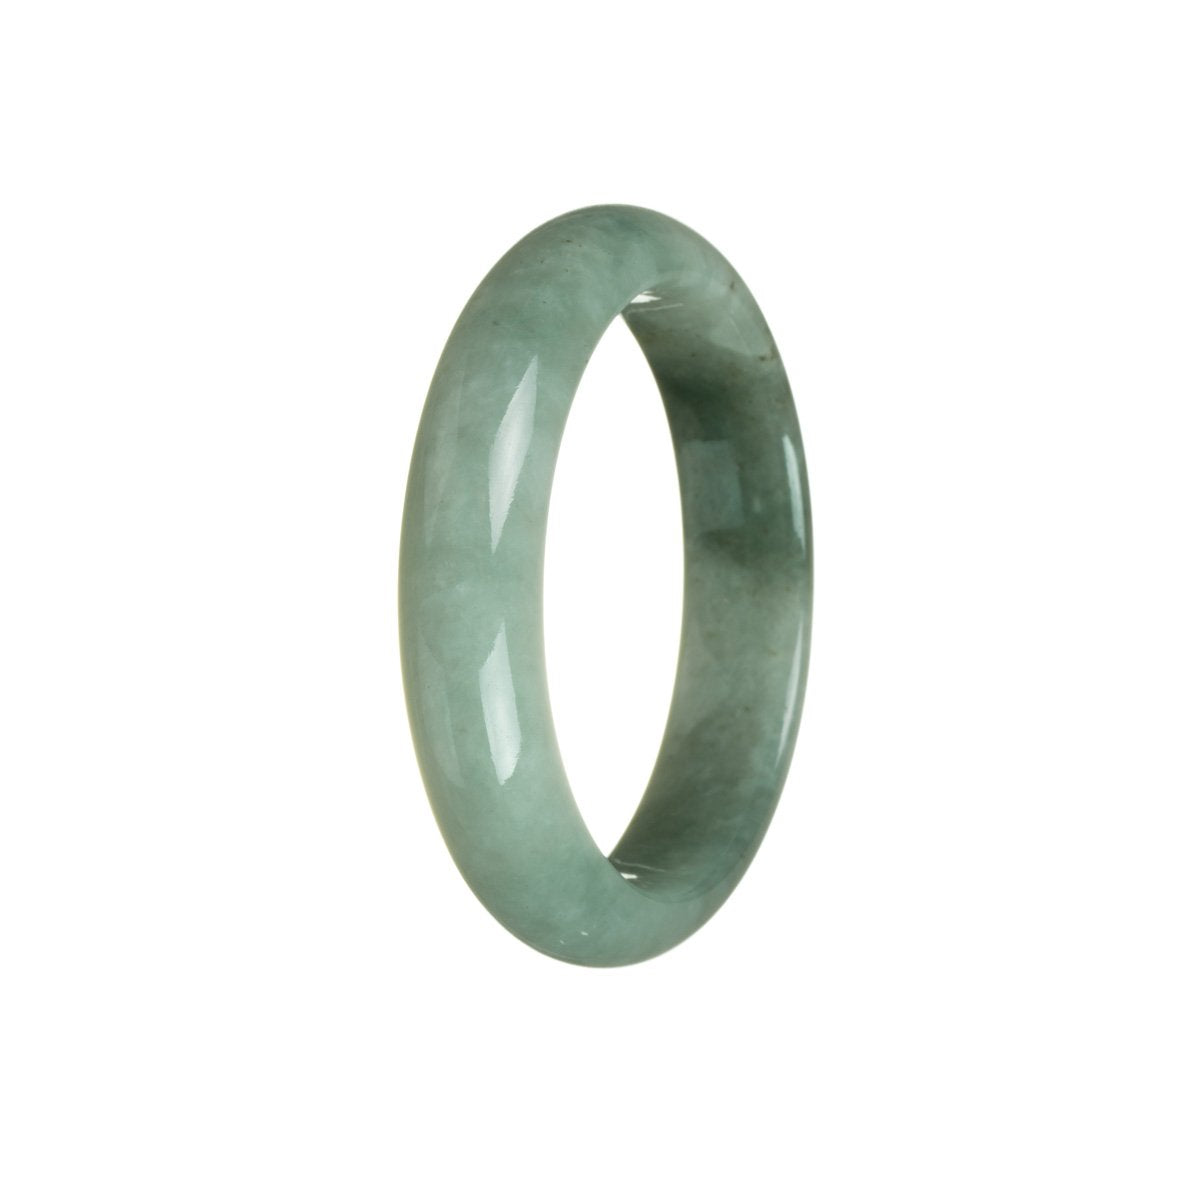 Authentic Grade A Green with Pale Green Traditional Jade Bracelet - 55mm Half Moon